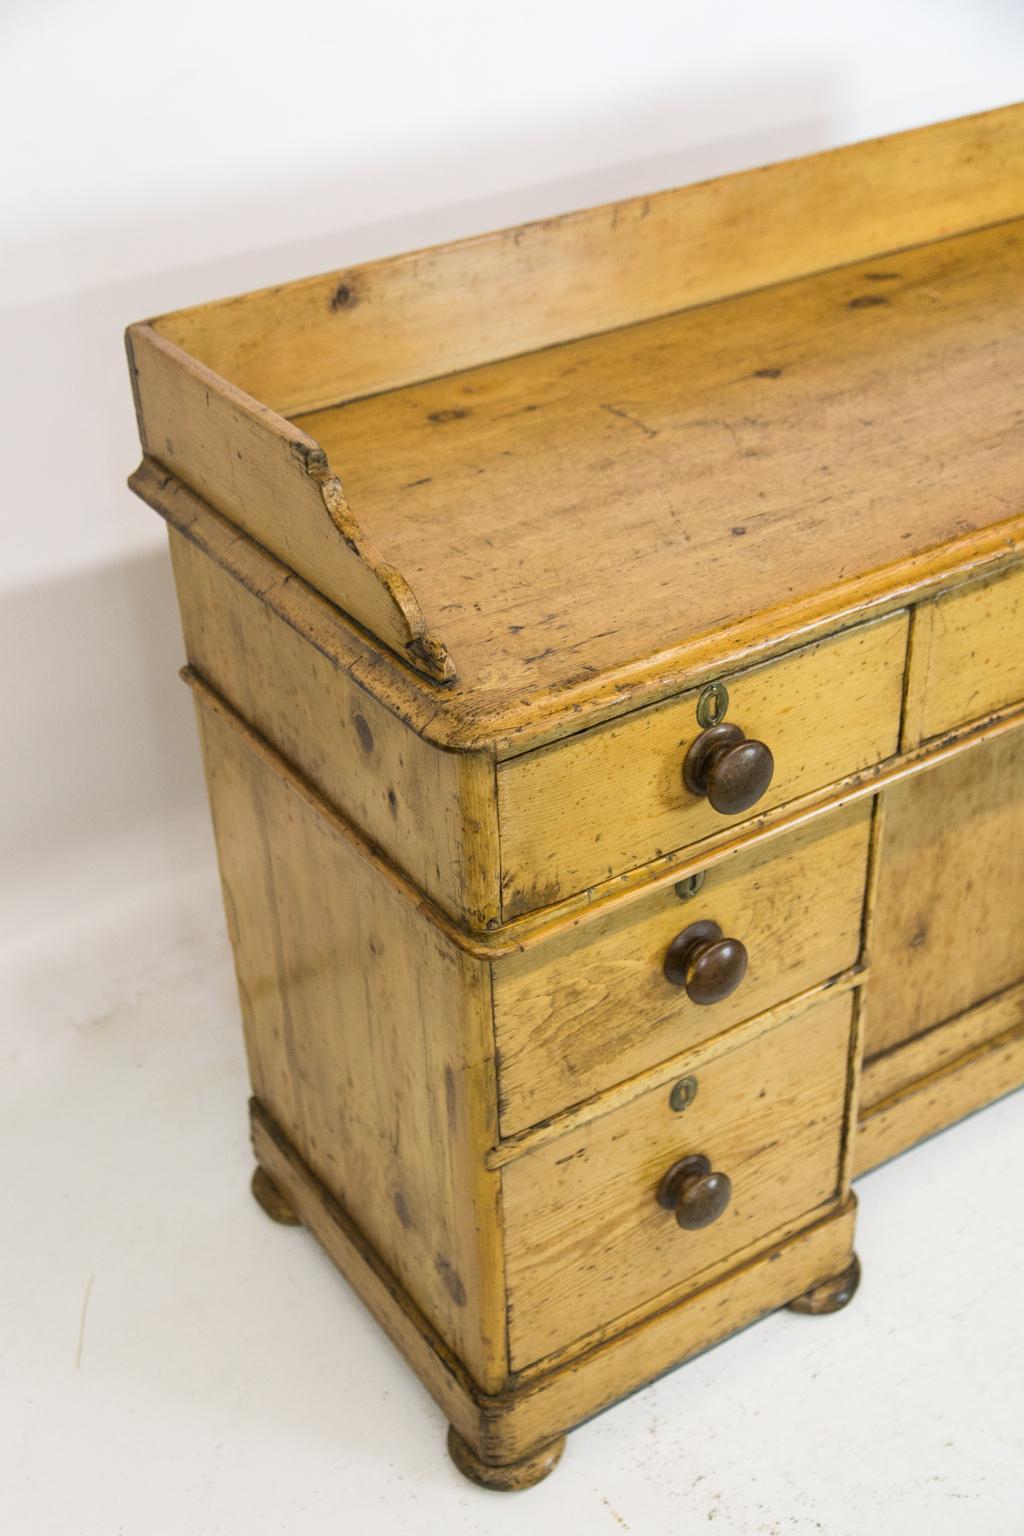 English pine knee hole server, retaining its original fruitwood knobs. The gallery has shaped fronts, and the top has an ogee molded edge. Two lower drawers on each side have a one inch recess from the top. The center cabinet has one interior shelf.